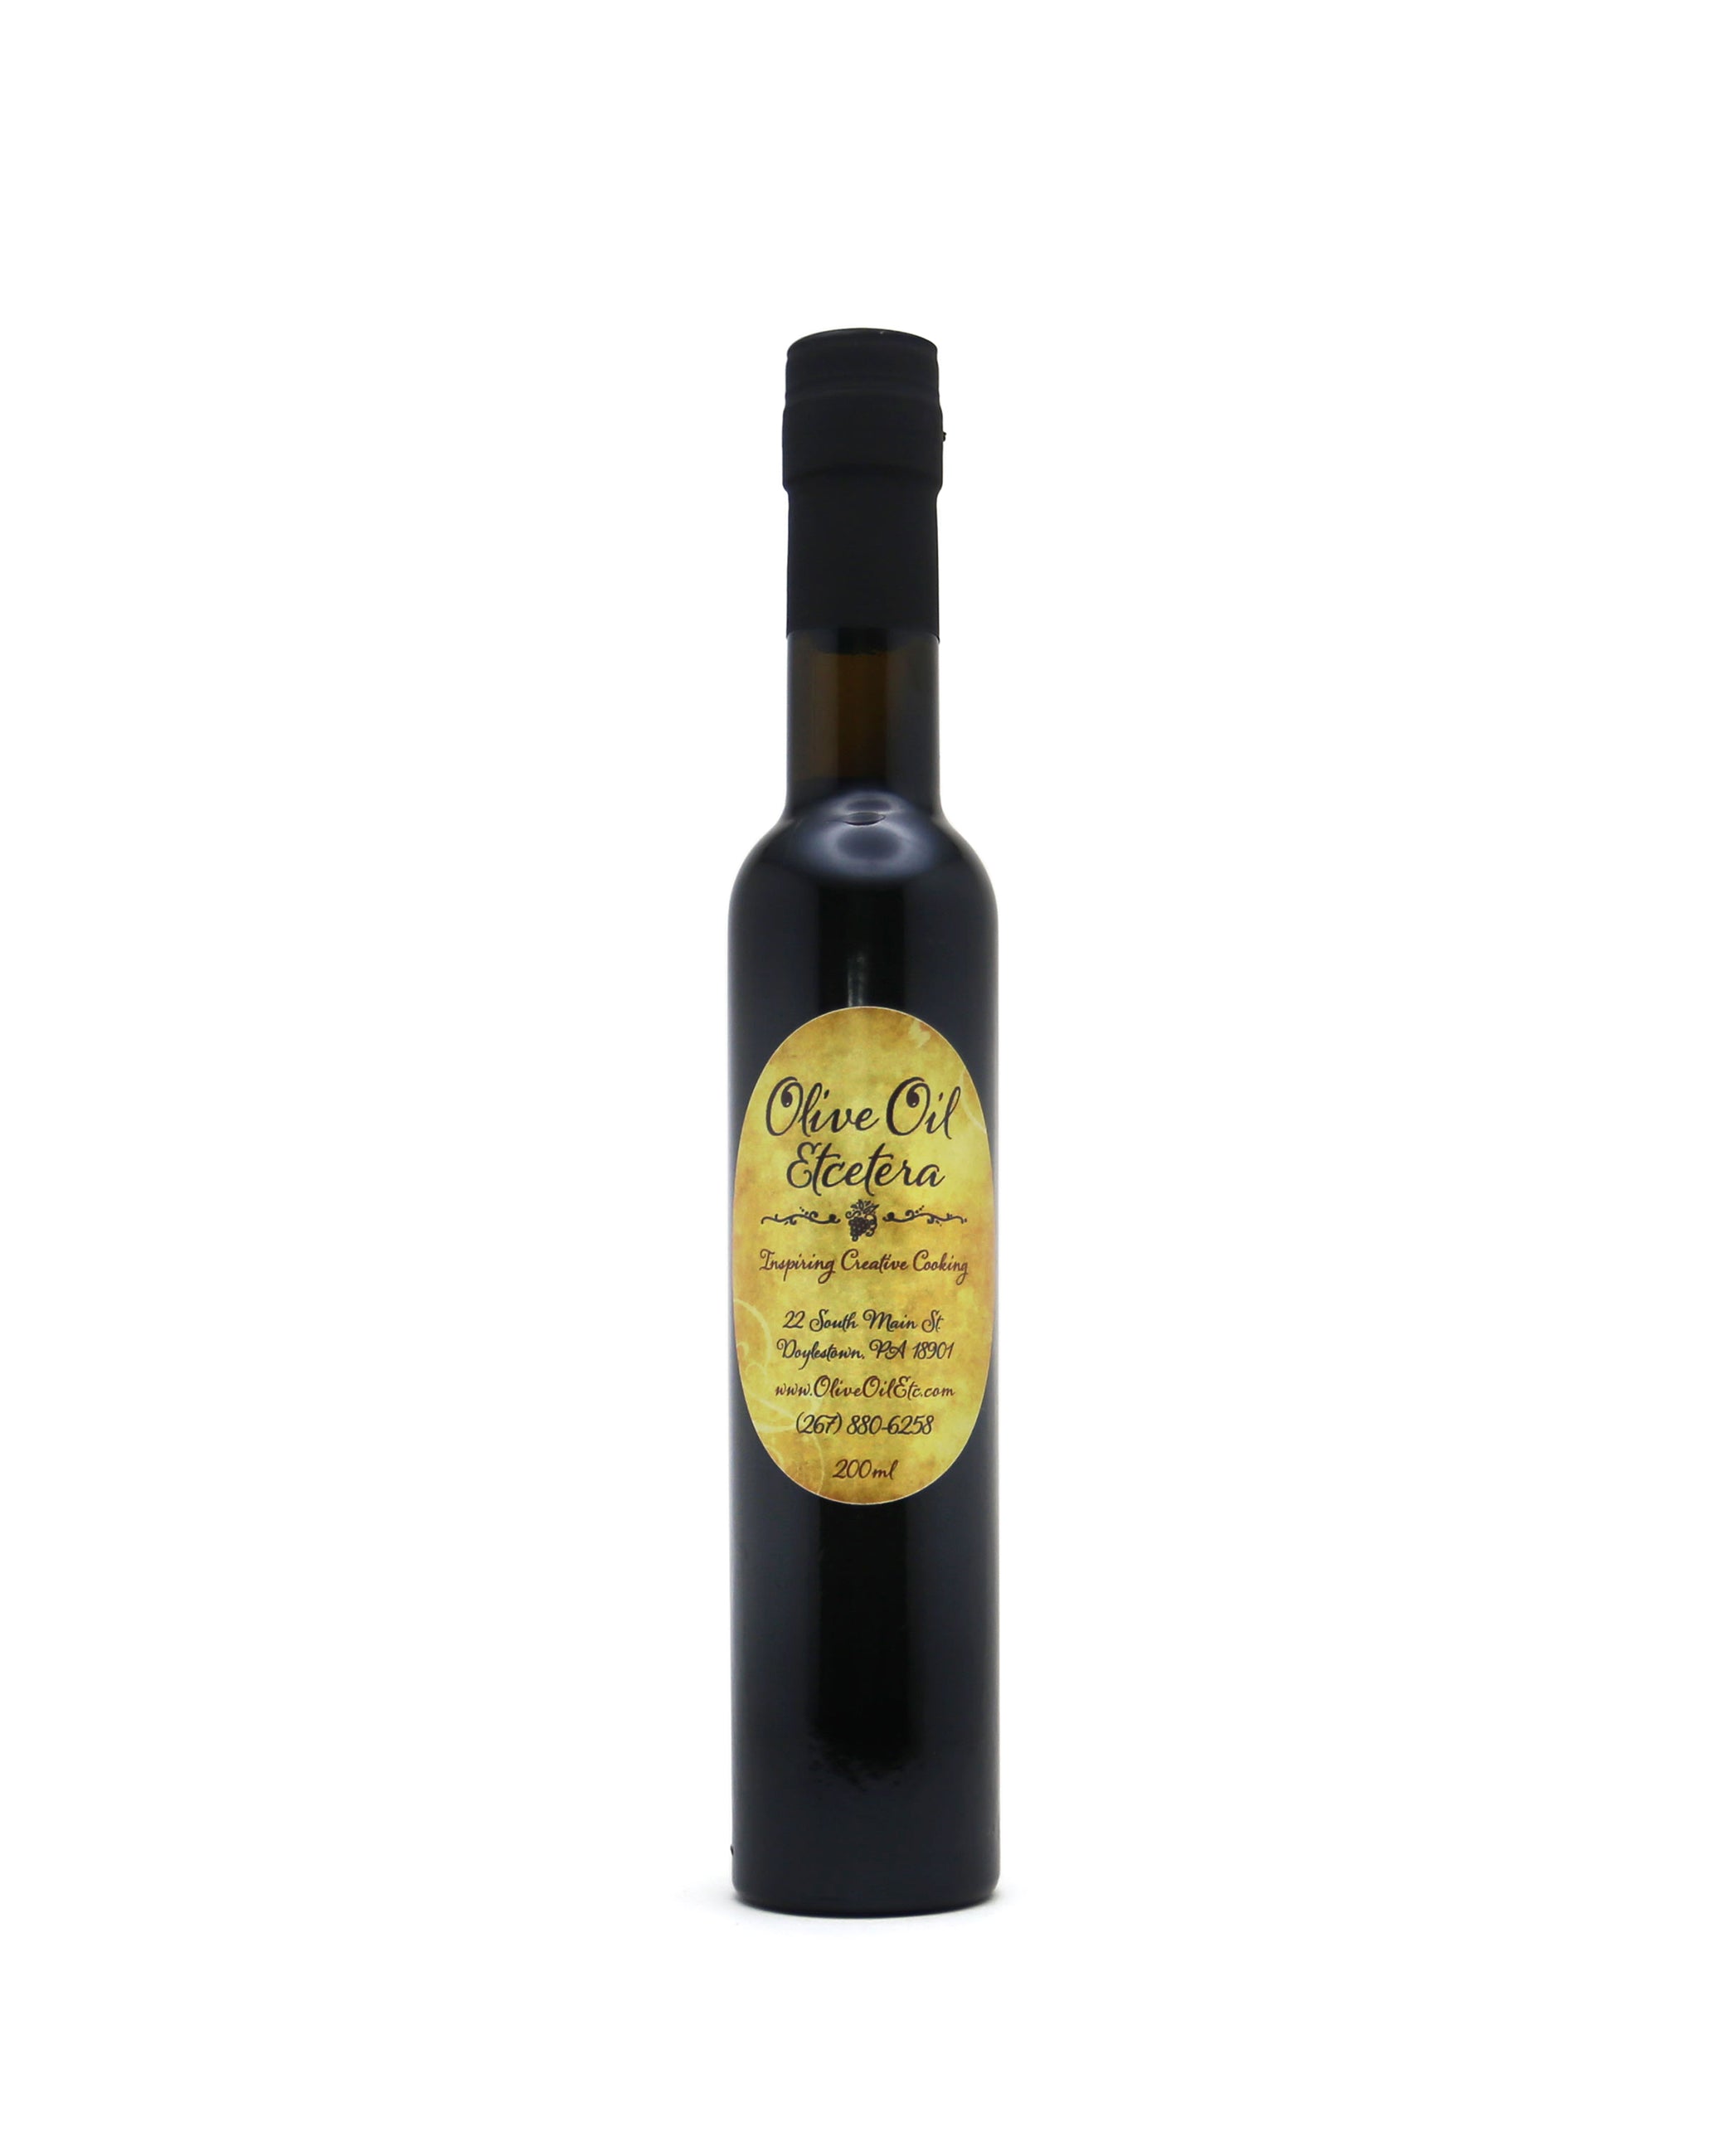 Fruity/Smooth Extra Virgin Olive Oil - Olive Oil Etcetera - Bucks county's gourmet olive oil and vinegar shop